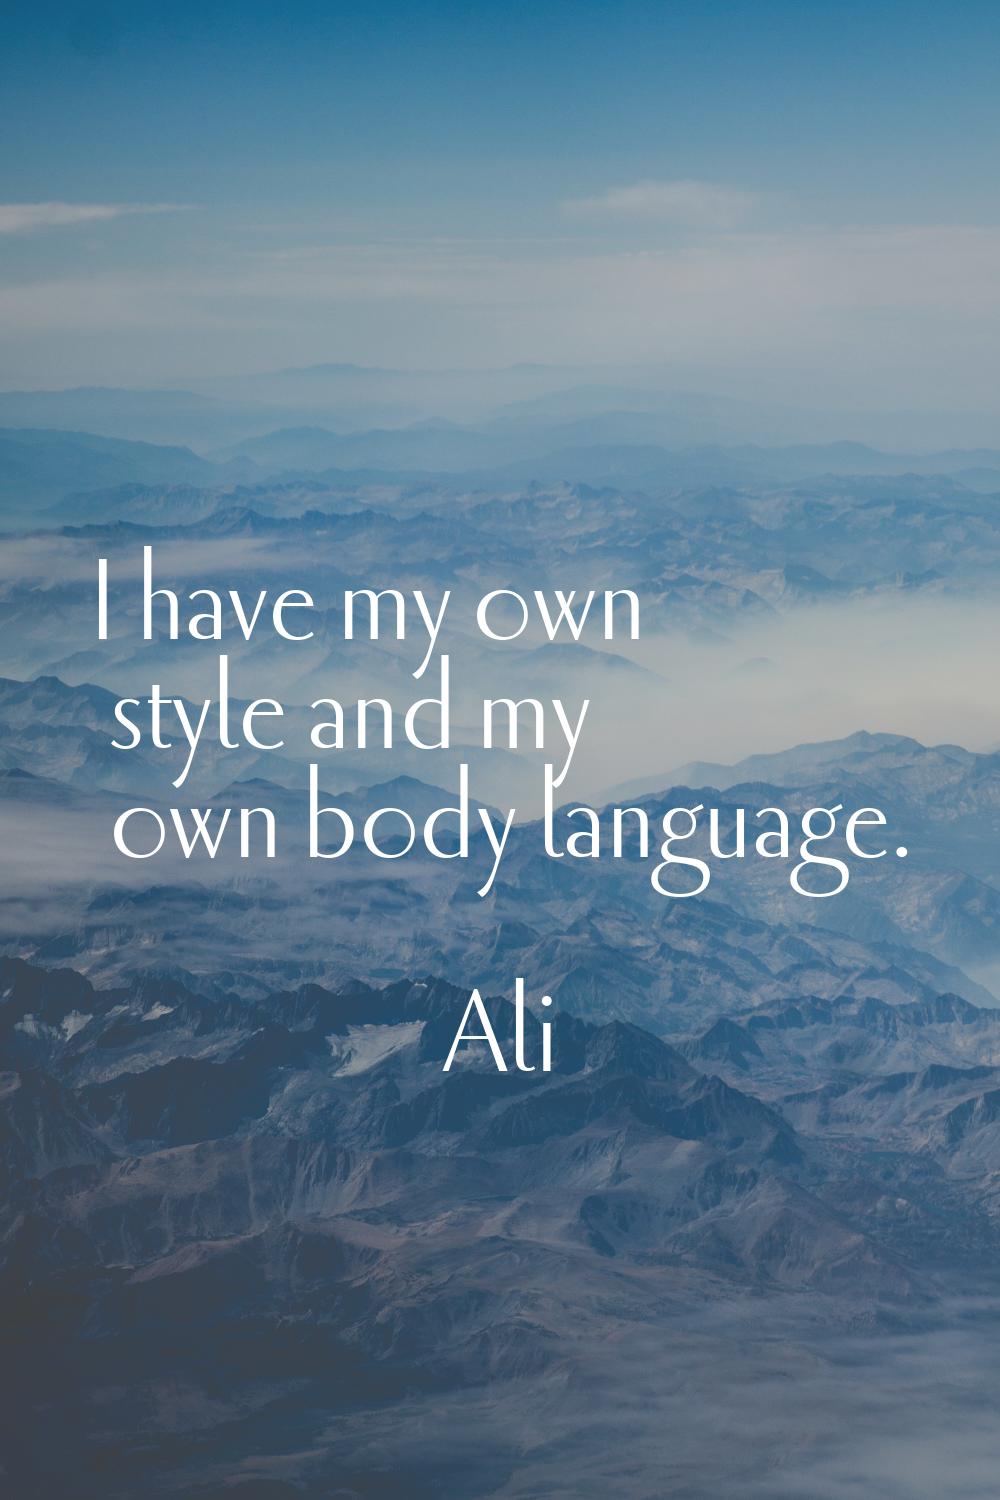 I have my own style and my own body language.